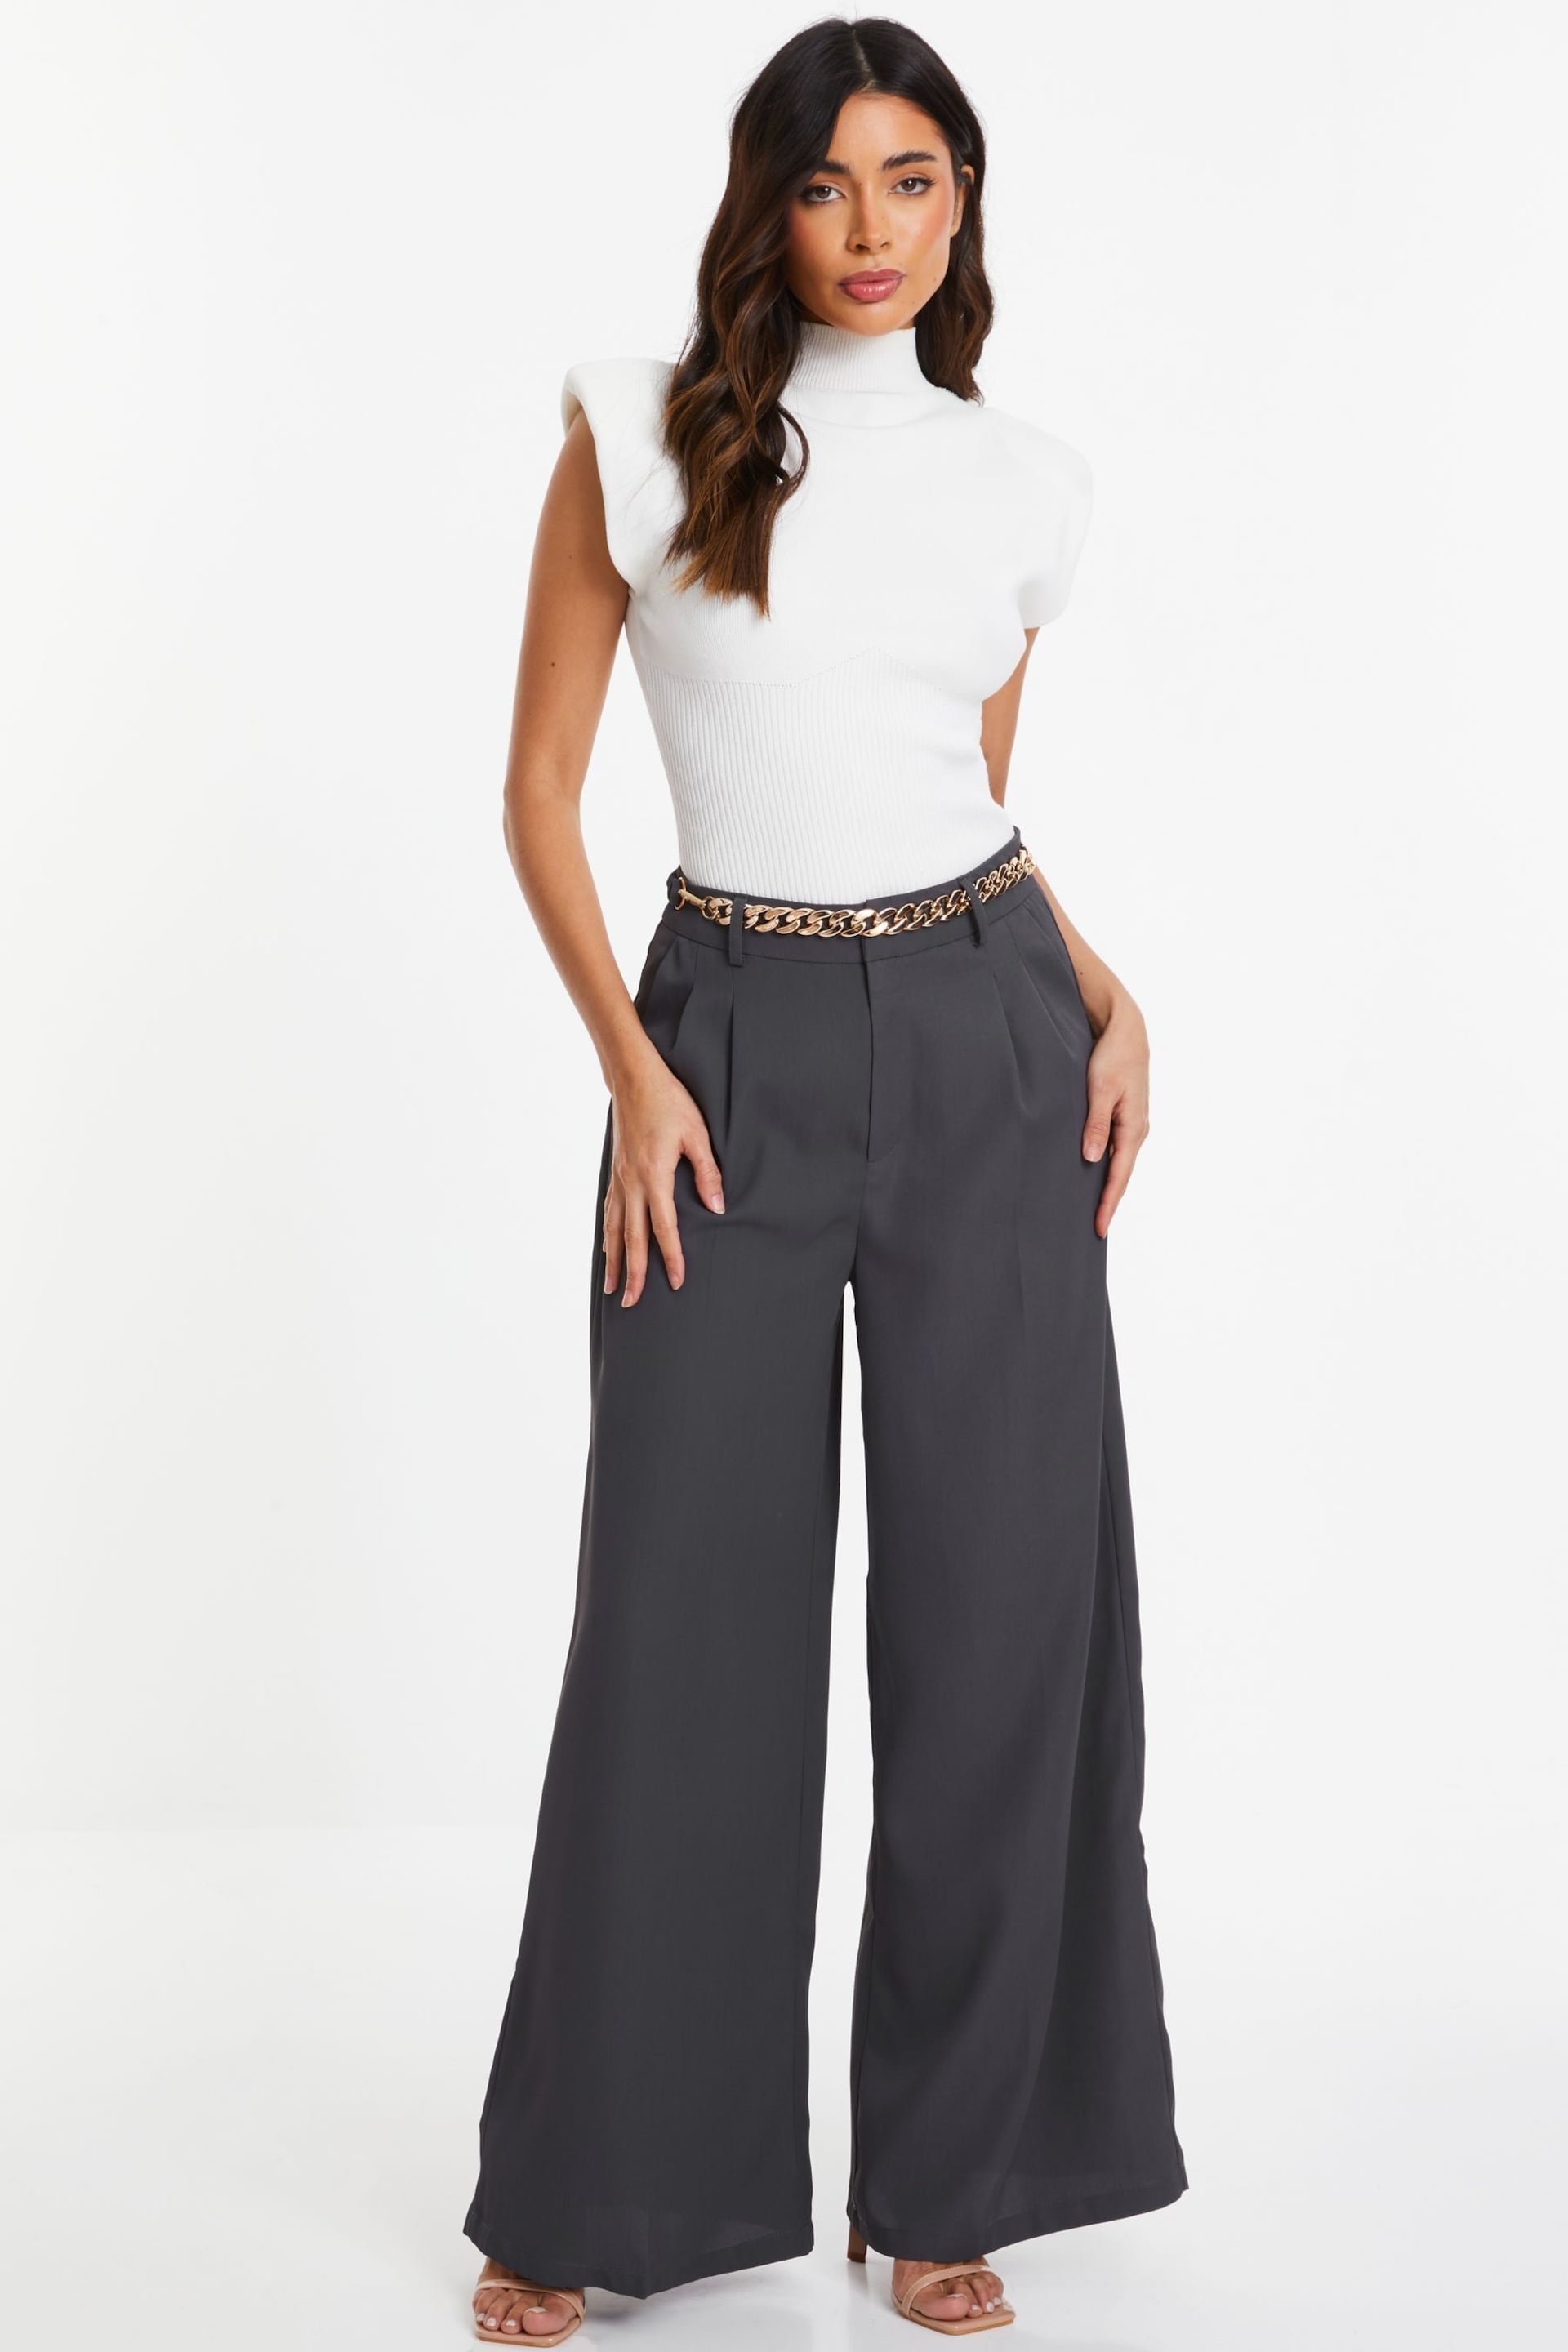 Quiz Grey Woven Wide Leg Trousers with Brown Chain Belt - Image 1 of 4